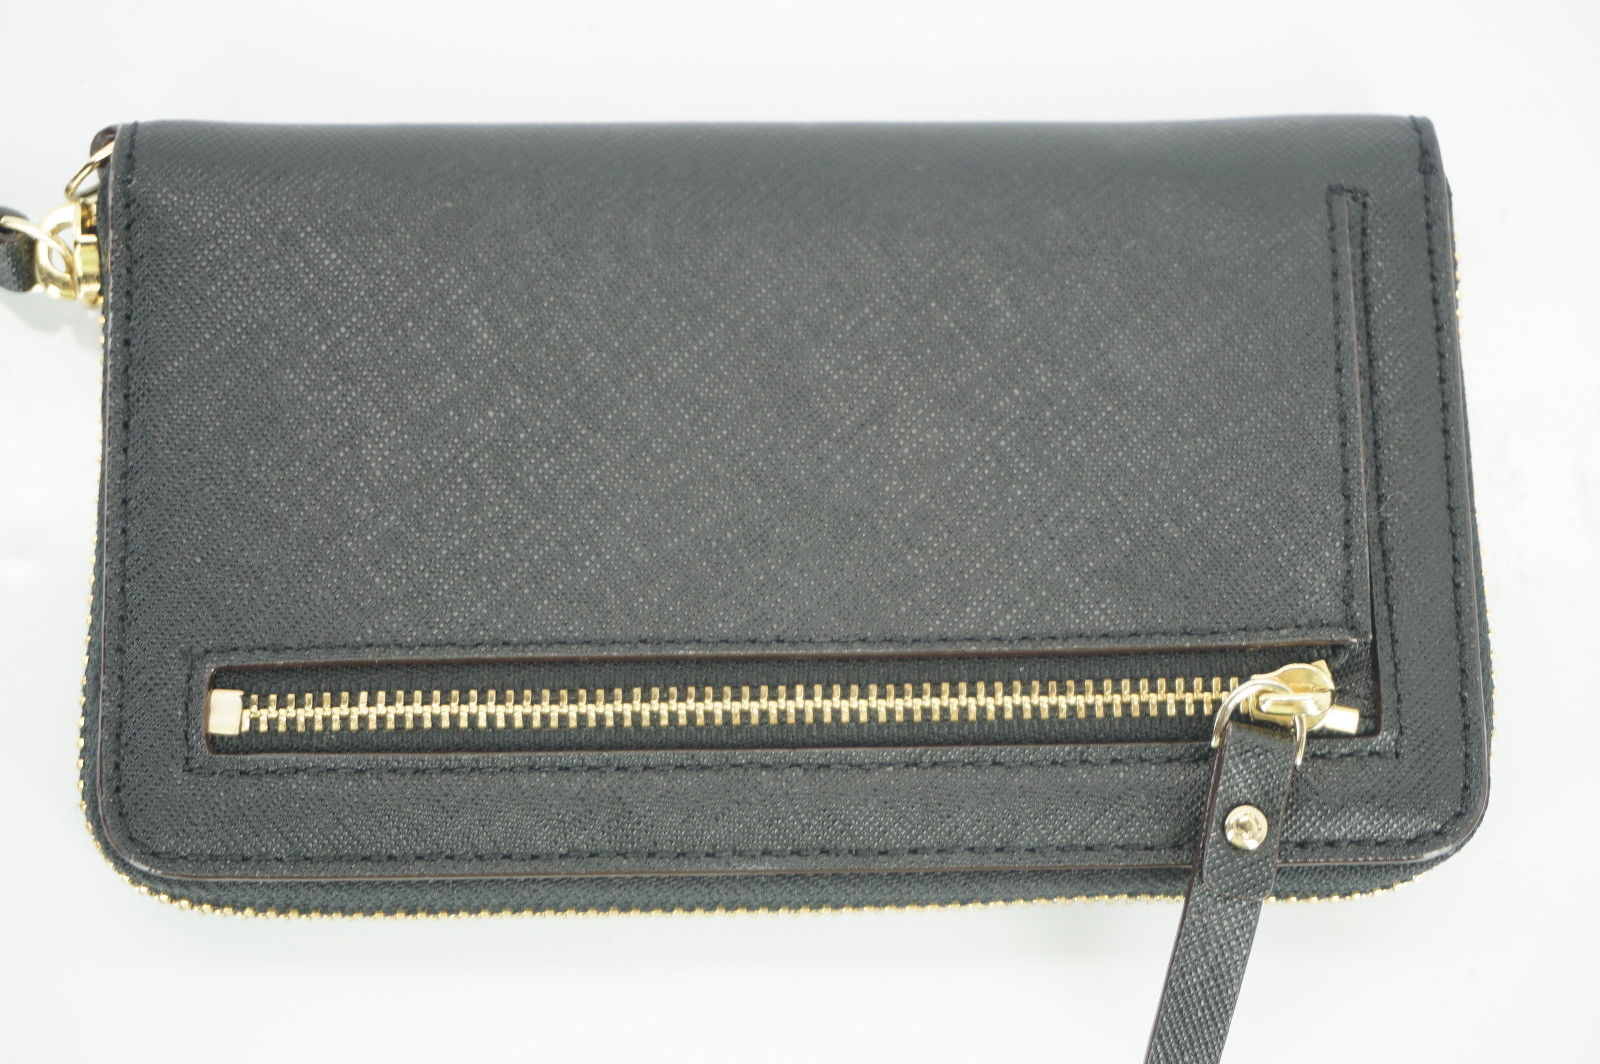 kate spade new york black Leather Cobble Hill Lacey Continental Zip Wallet $148